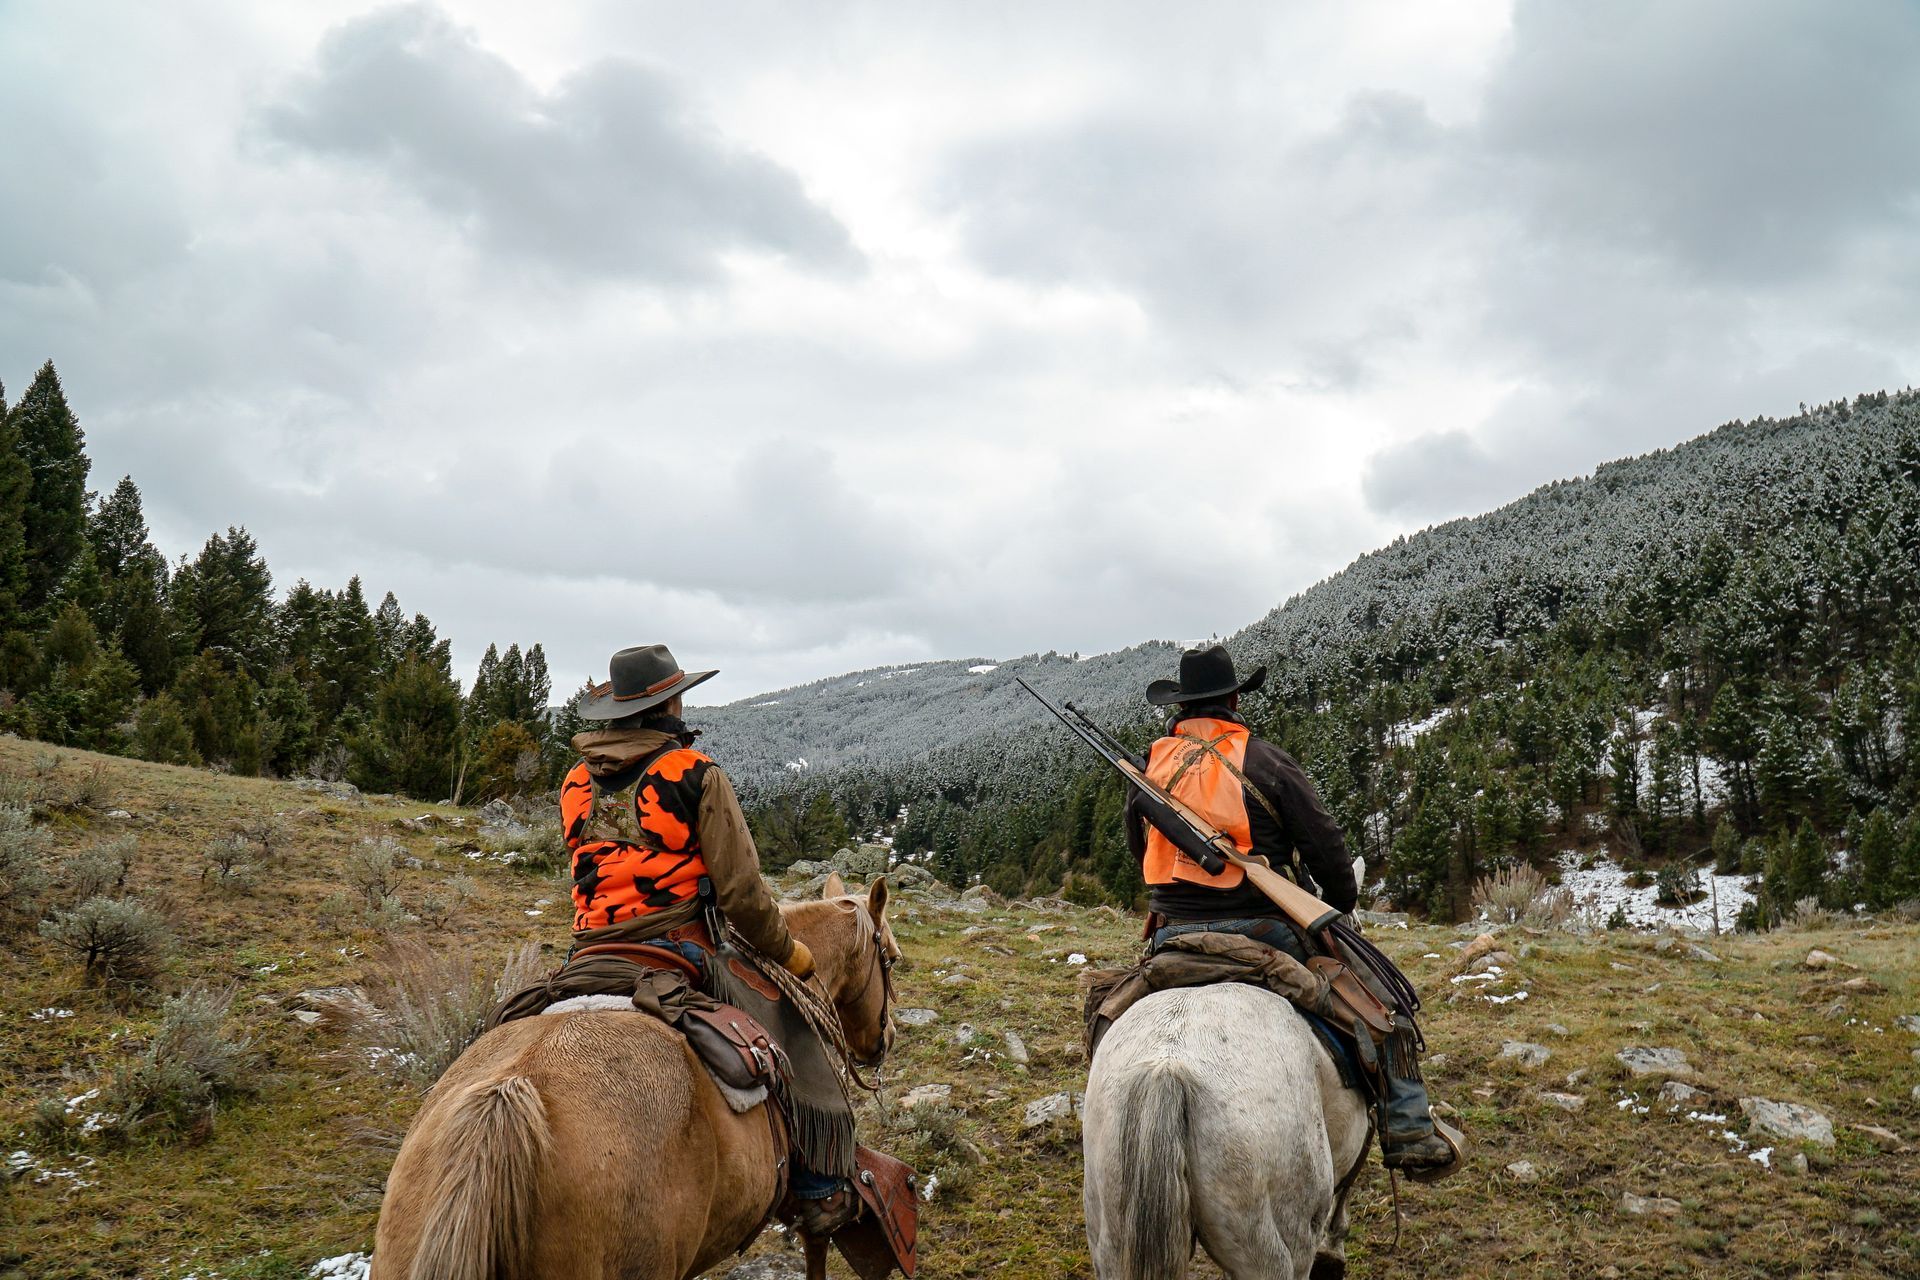 Two men are riding horses in a field with mountains in the background.